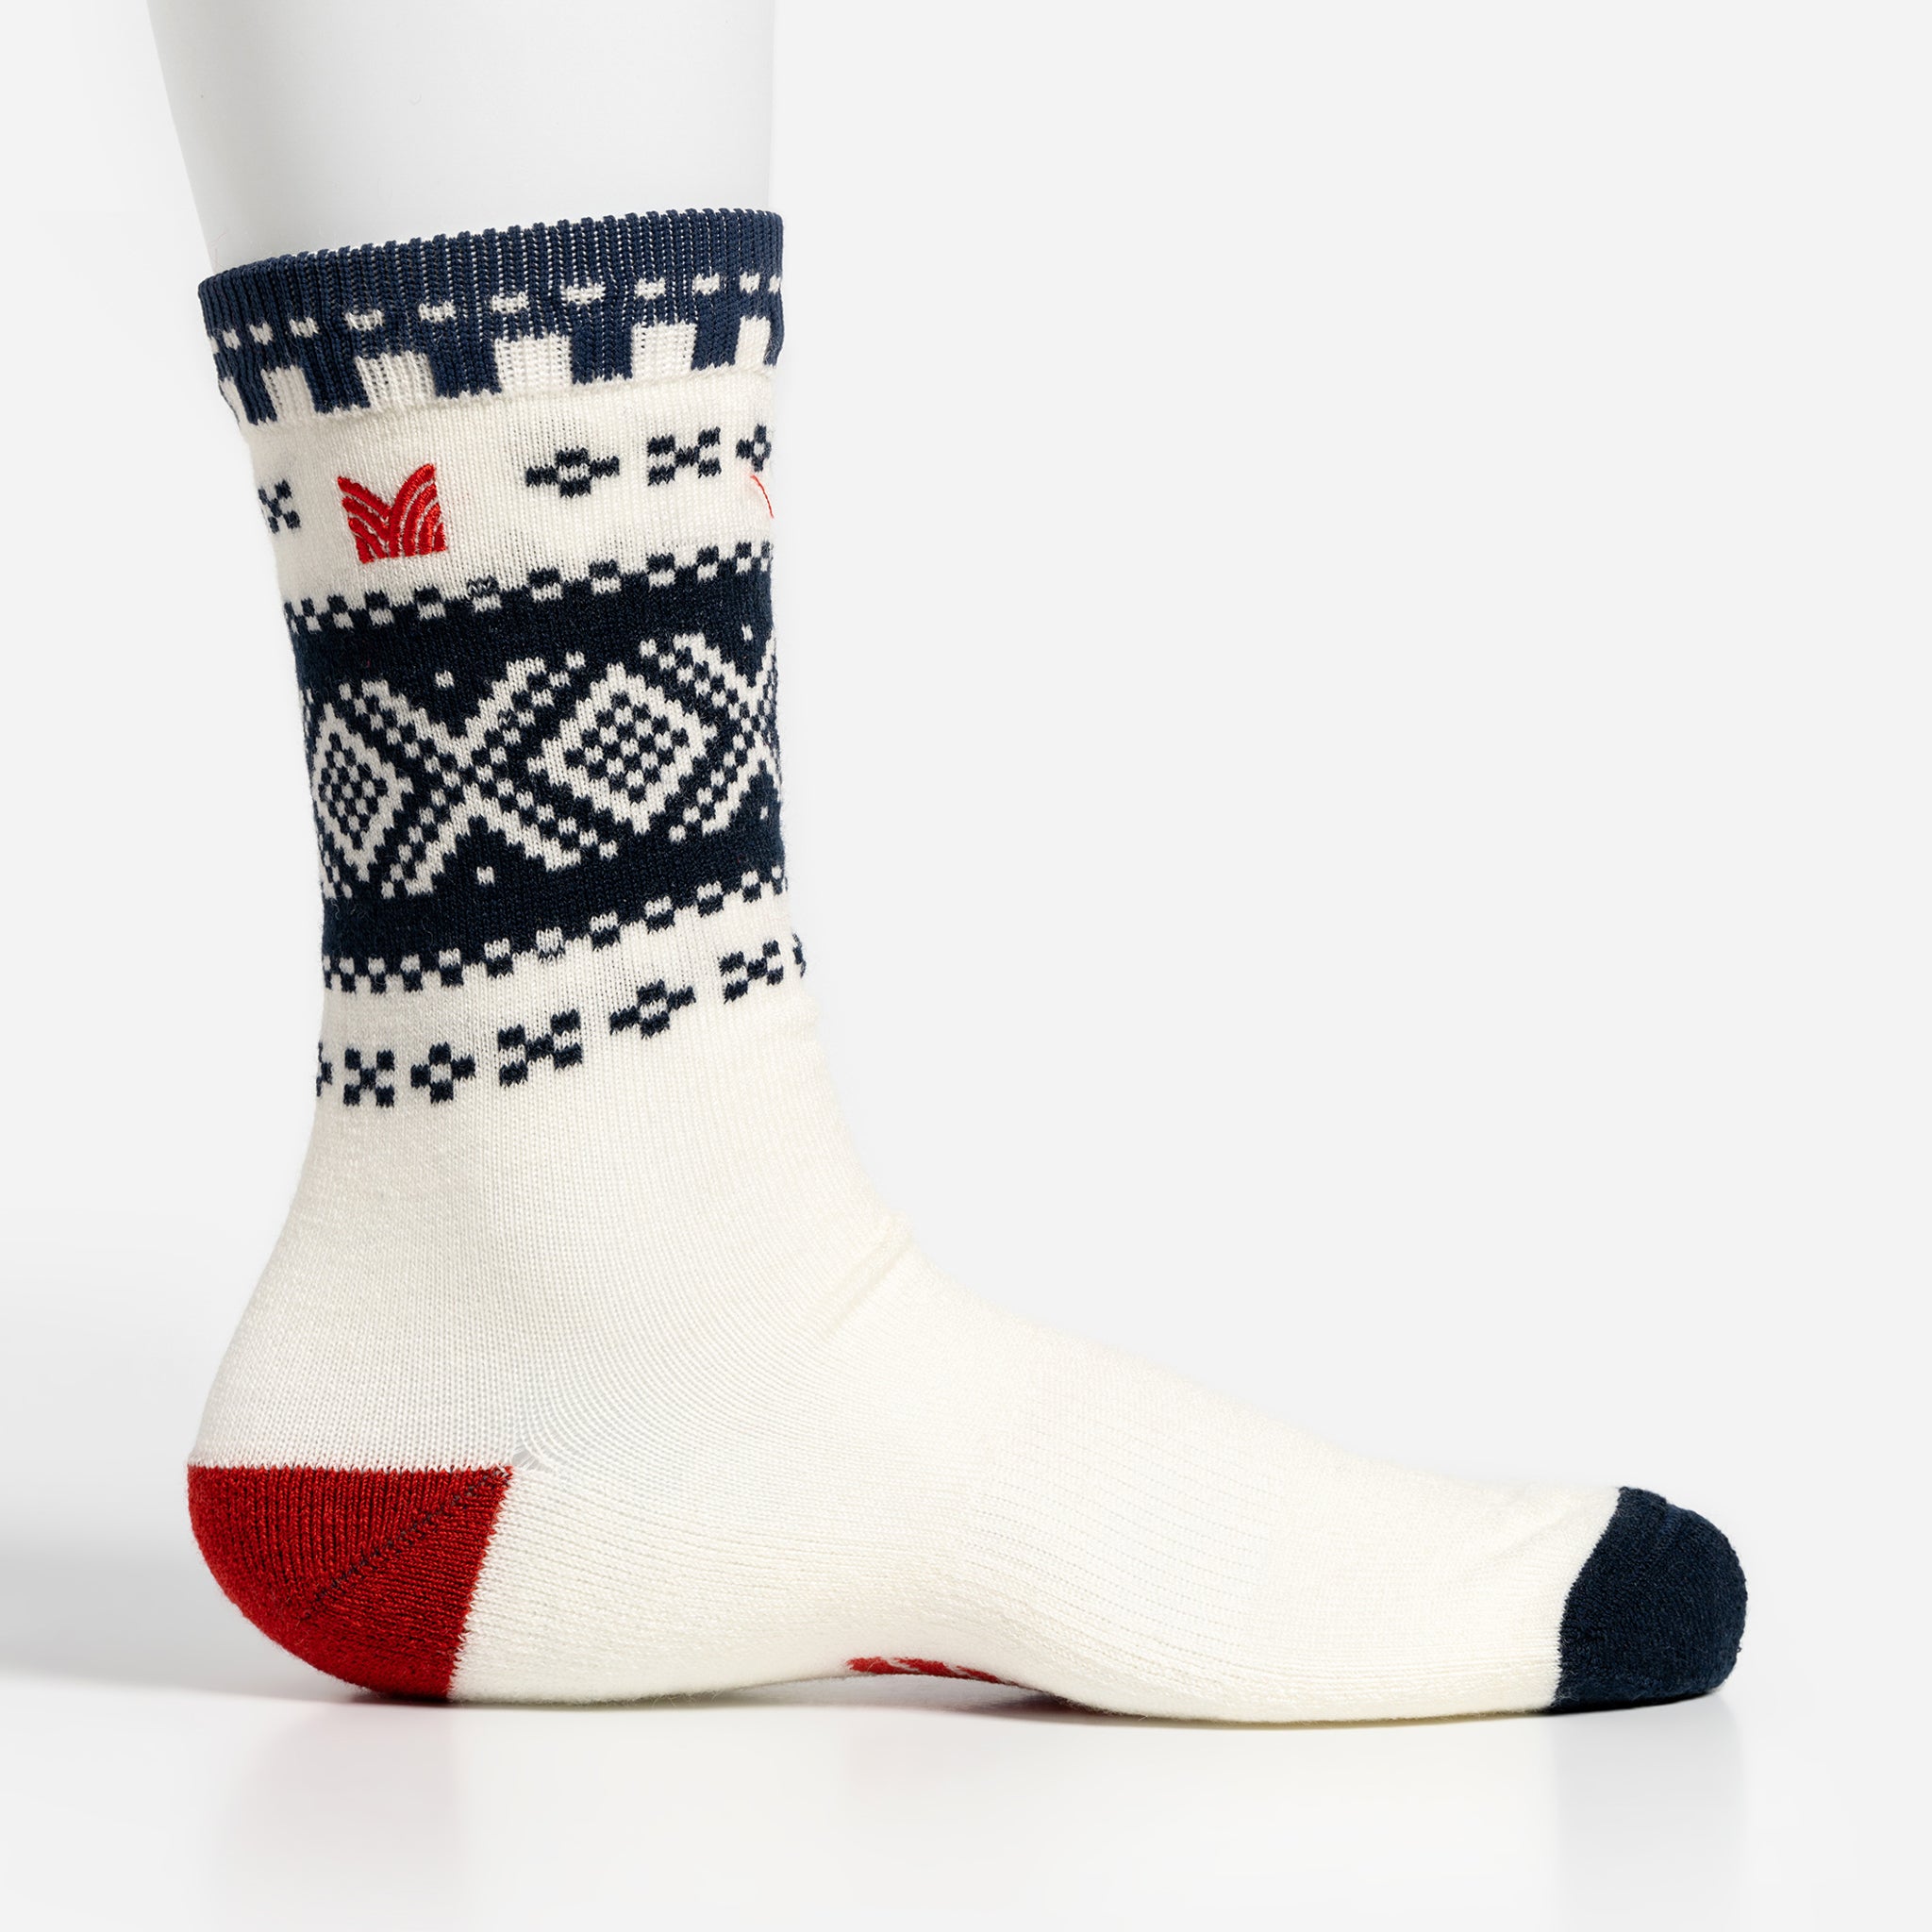 Cortina Sock by Dale of Norway